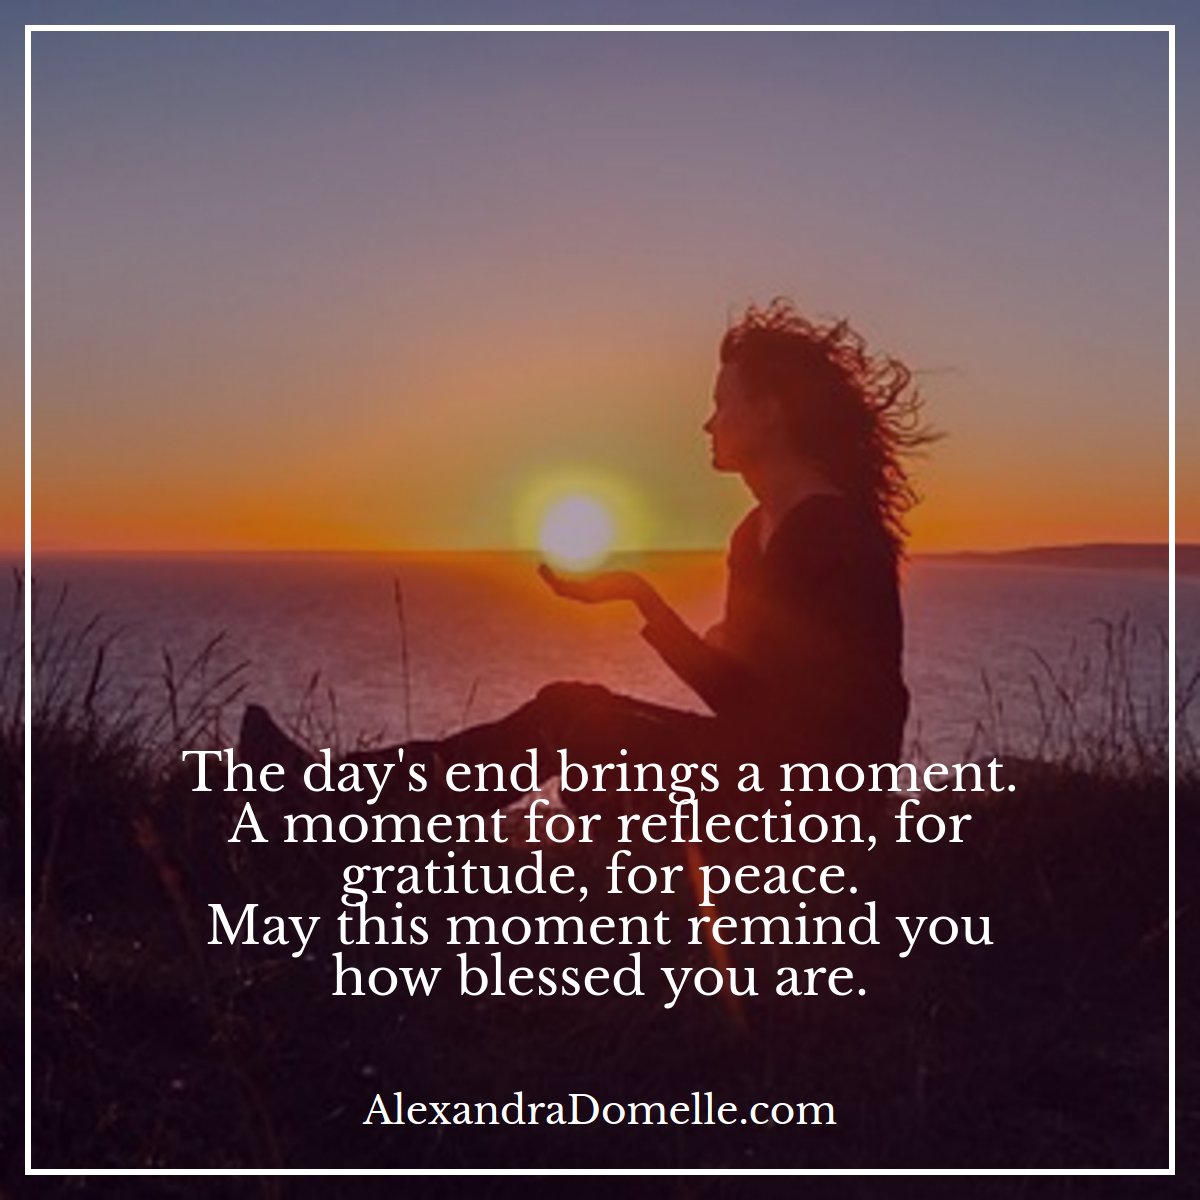 May this moment remind you how #Blessed you are. #JoyTrain #Joy #Love #Peace #Gratitude RT @alexdomelle